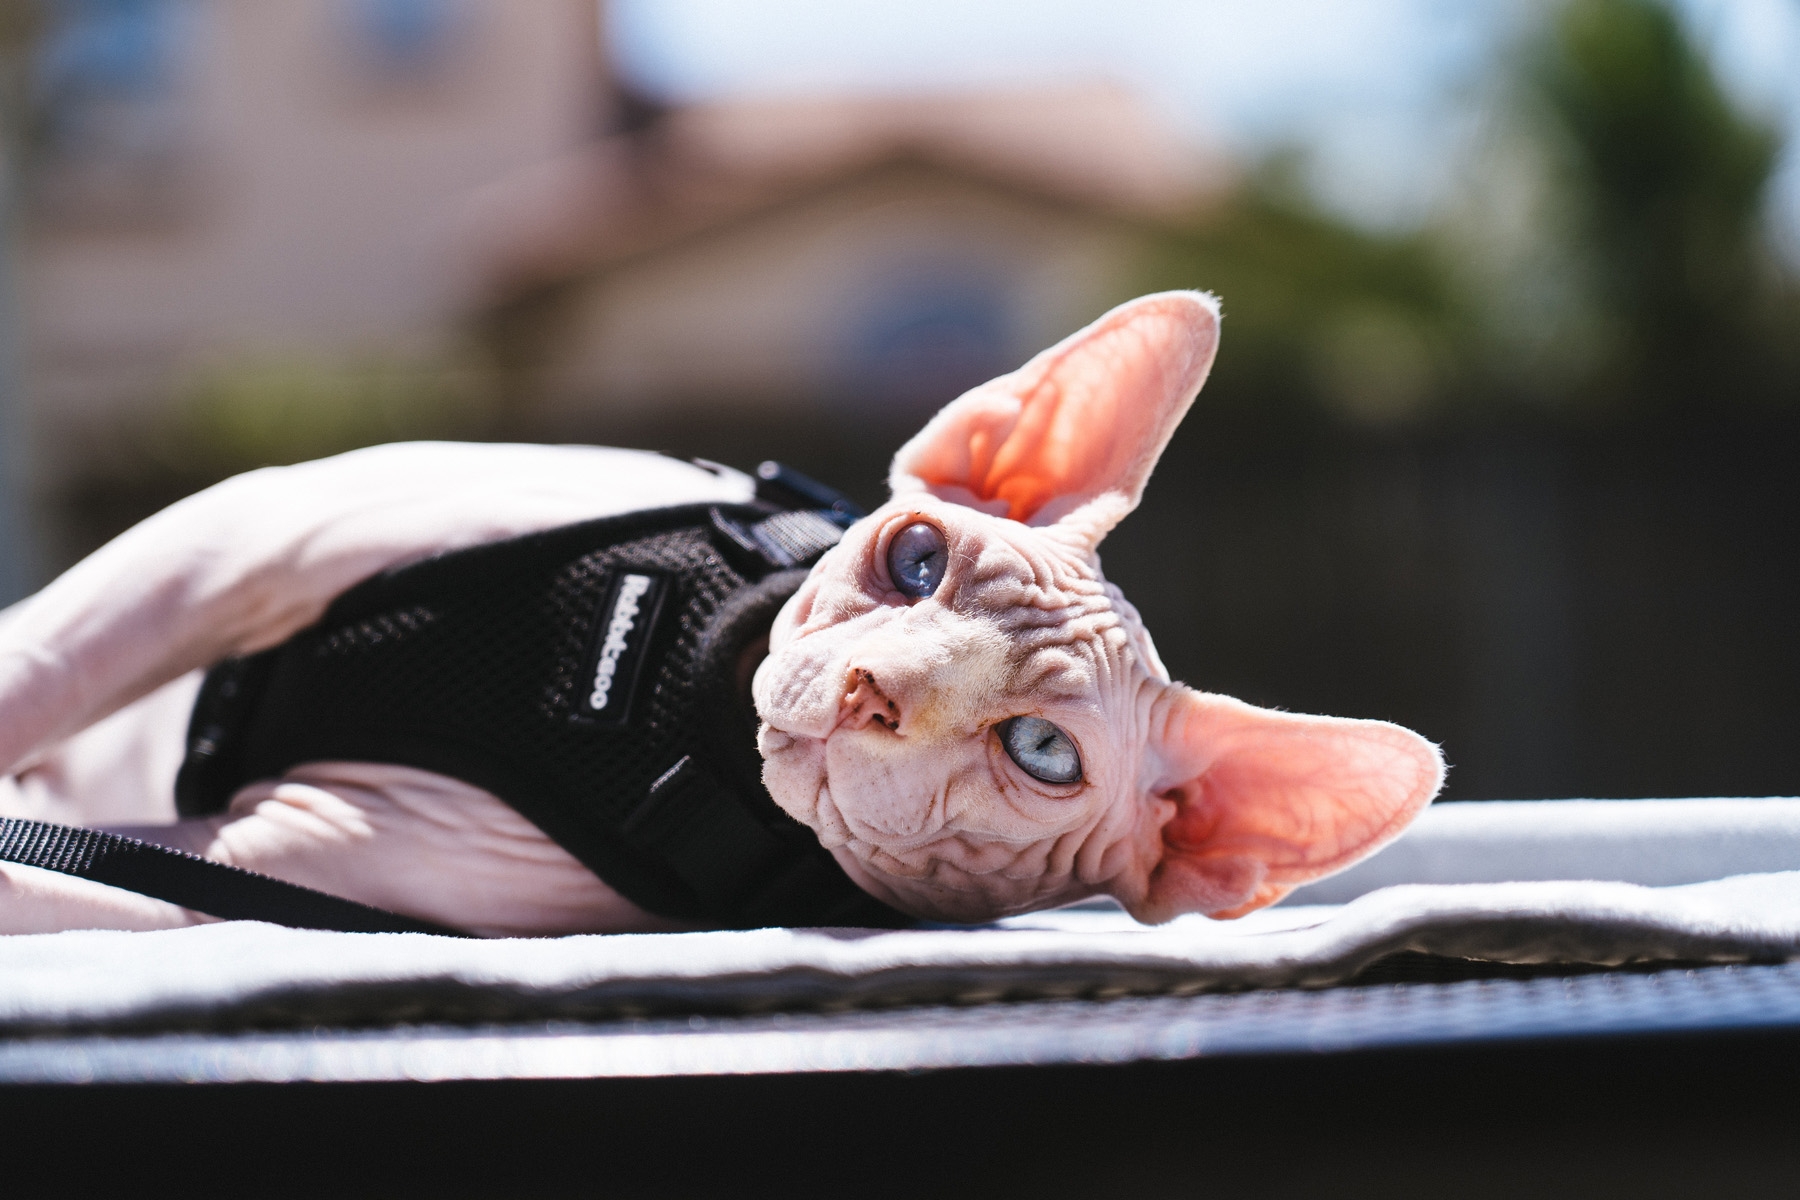 Sphynx cats may be good for people with allergies because they do not have hair to groom.